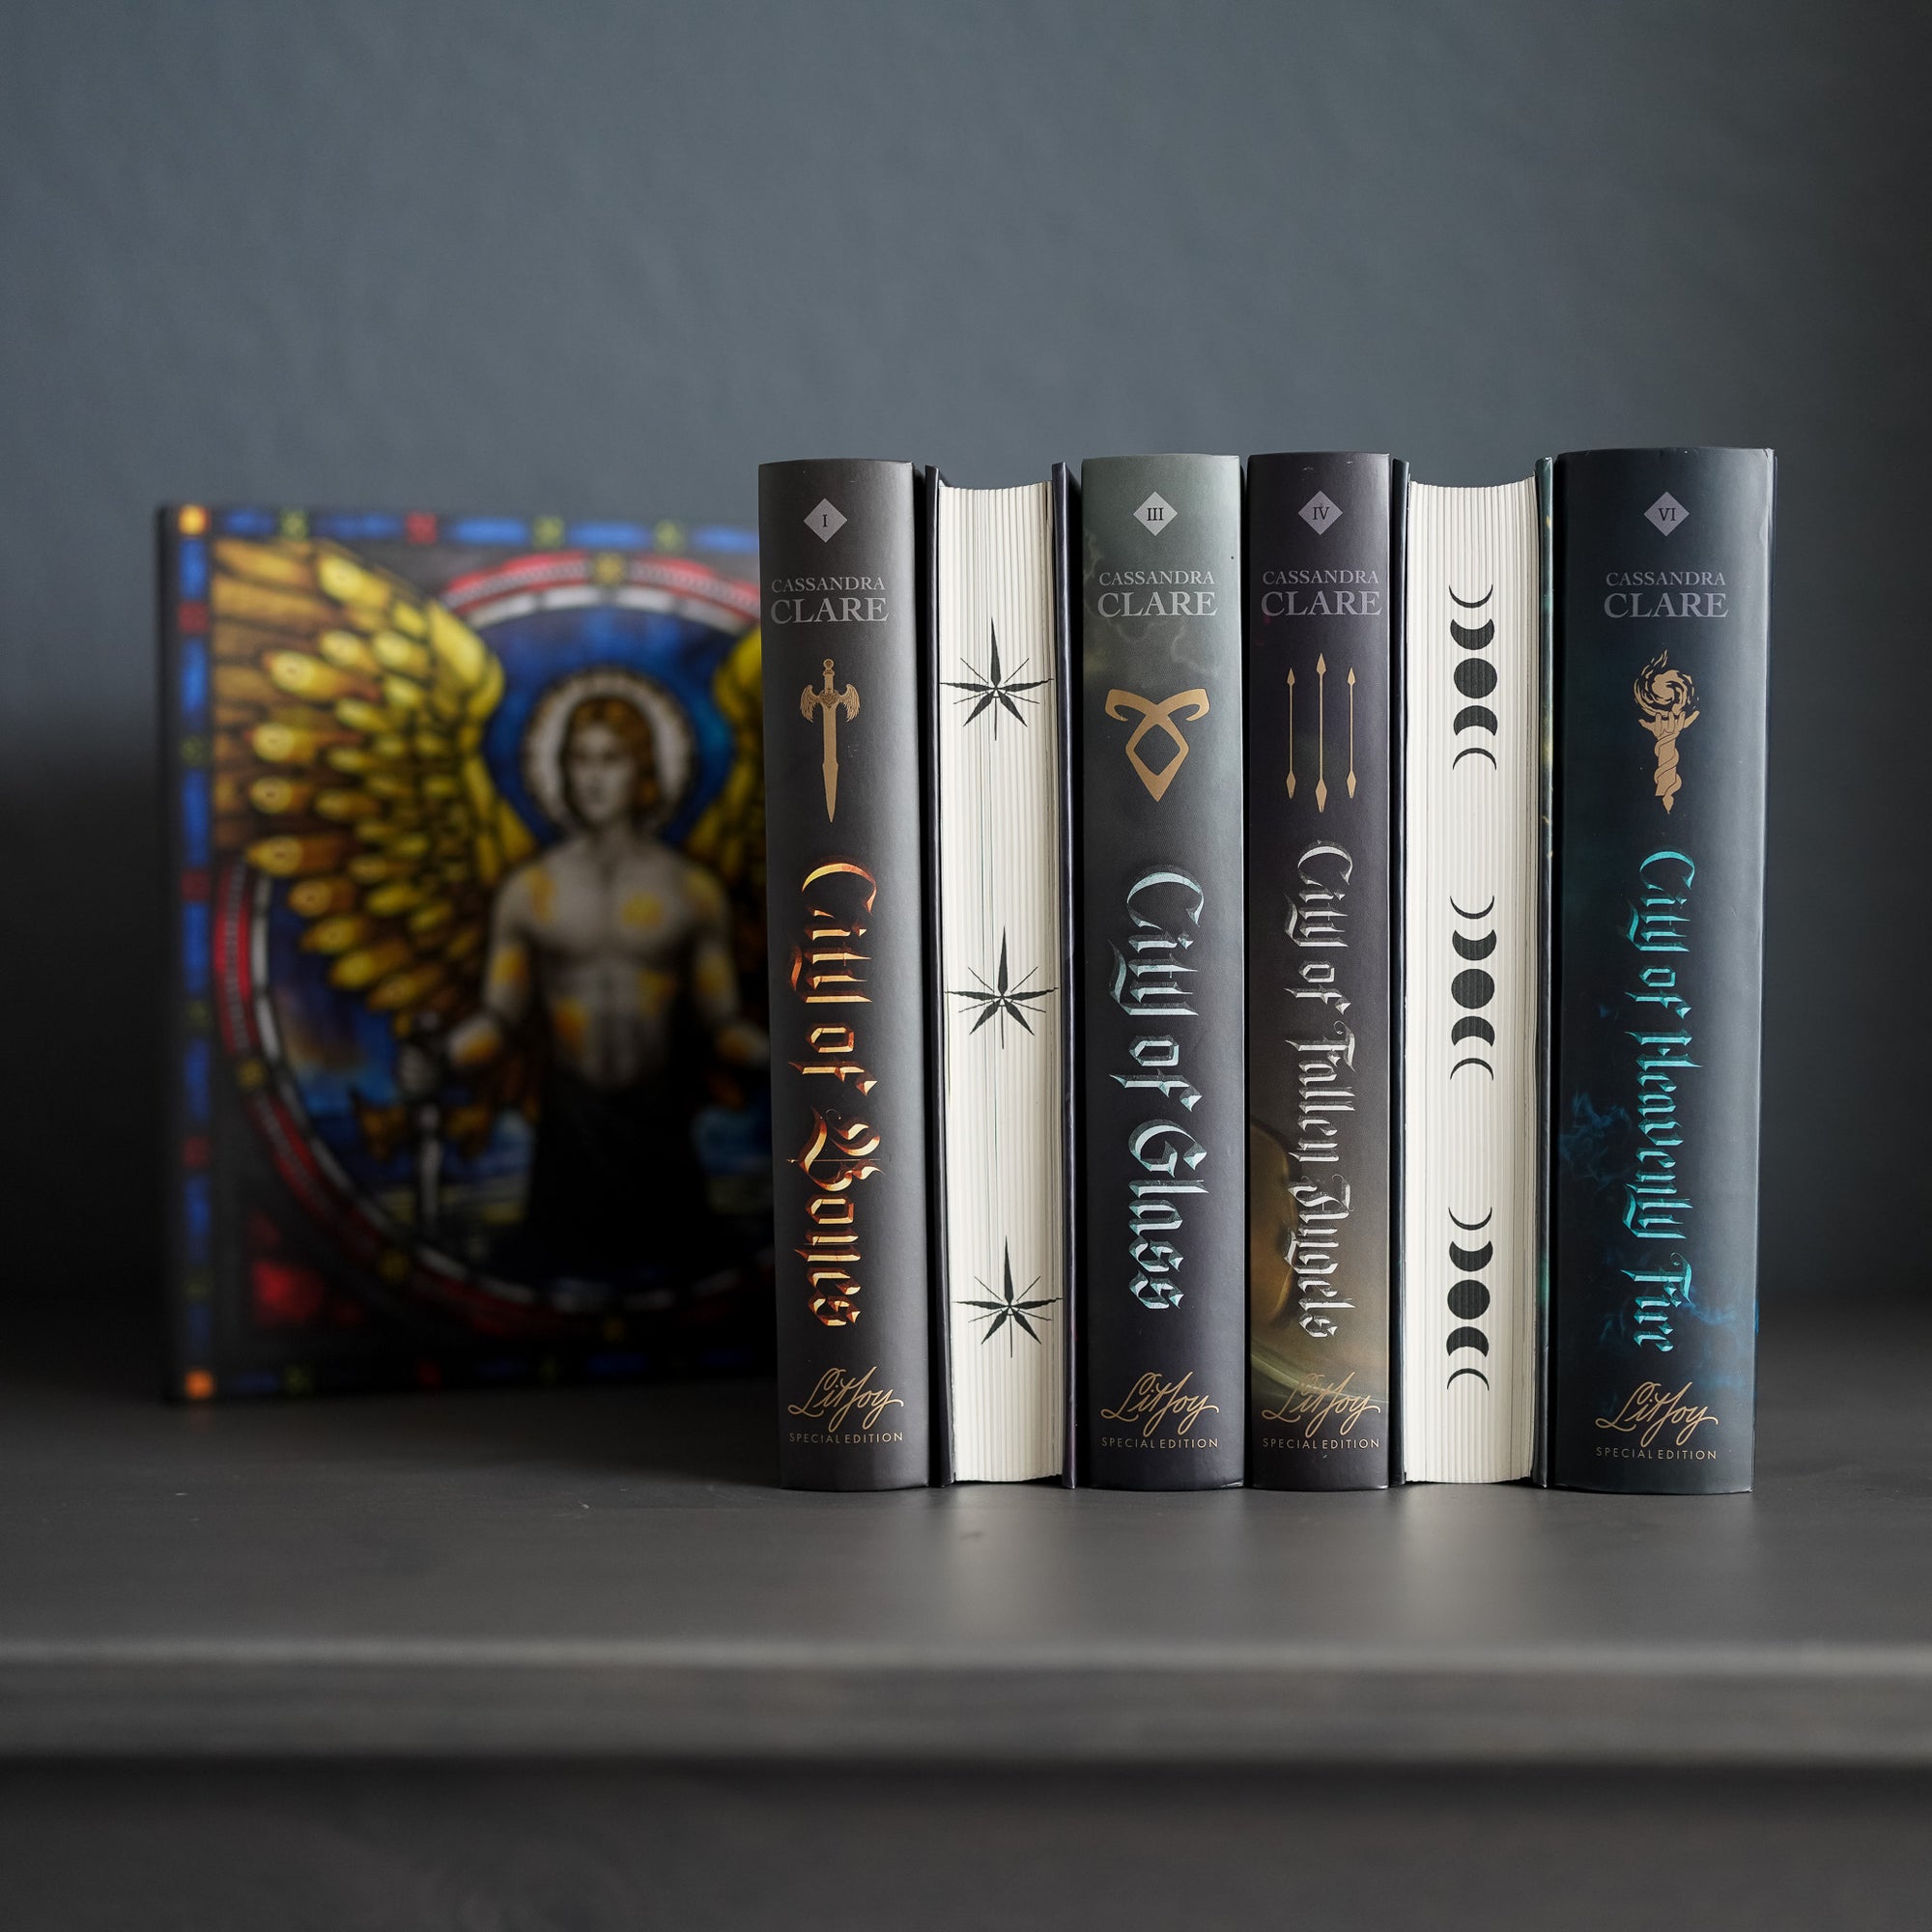 Special Edition The Mortal Instruments Box Set showing book spines and designed page edges with Shadowhunter runes